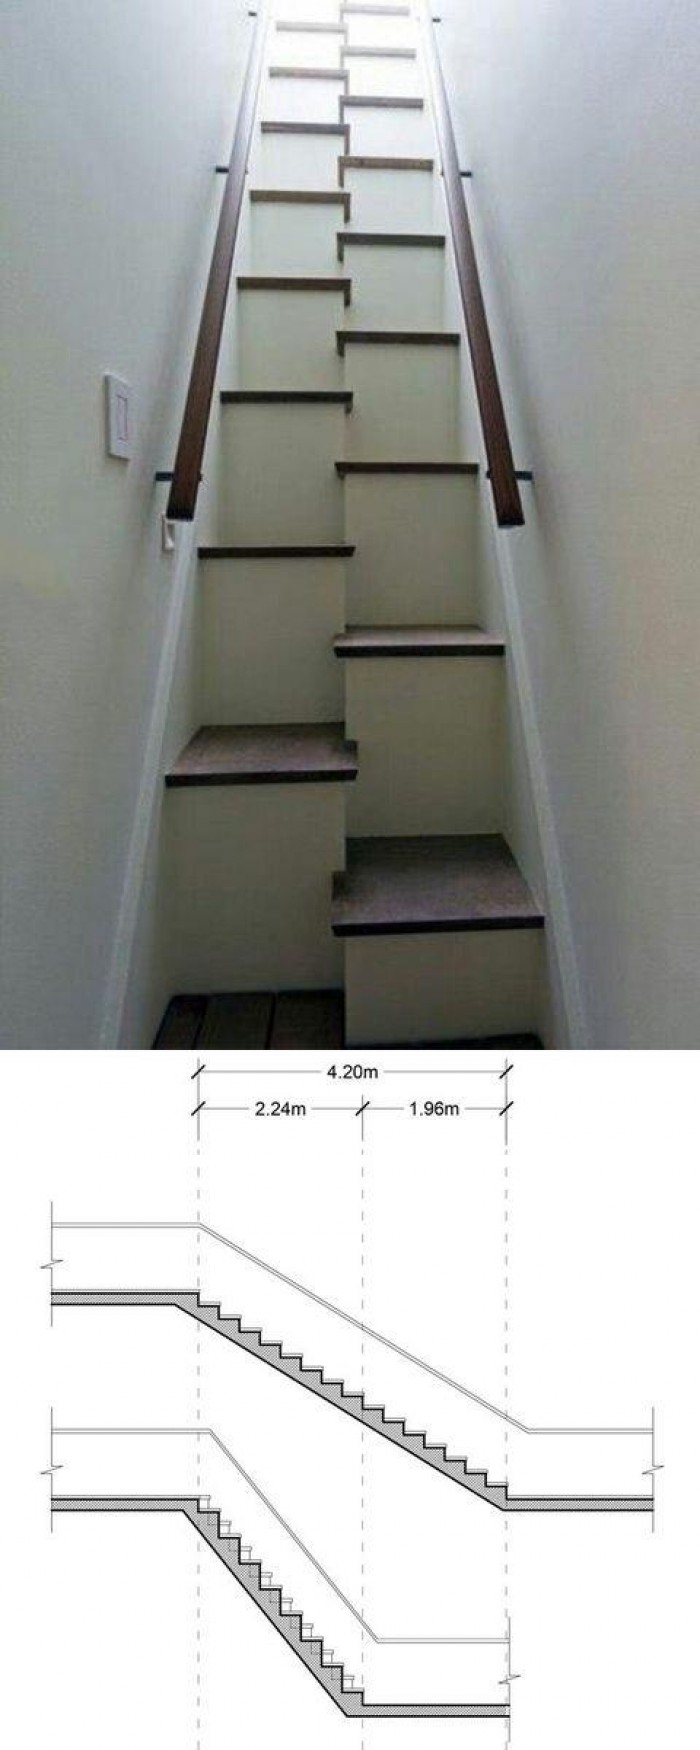 There is a reason to build stairs like this.